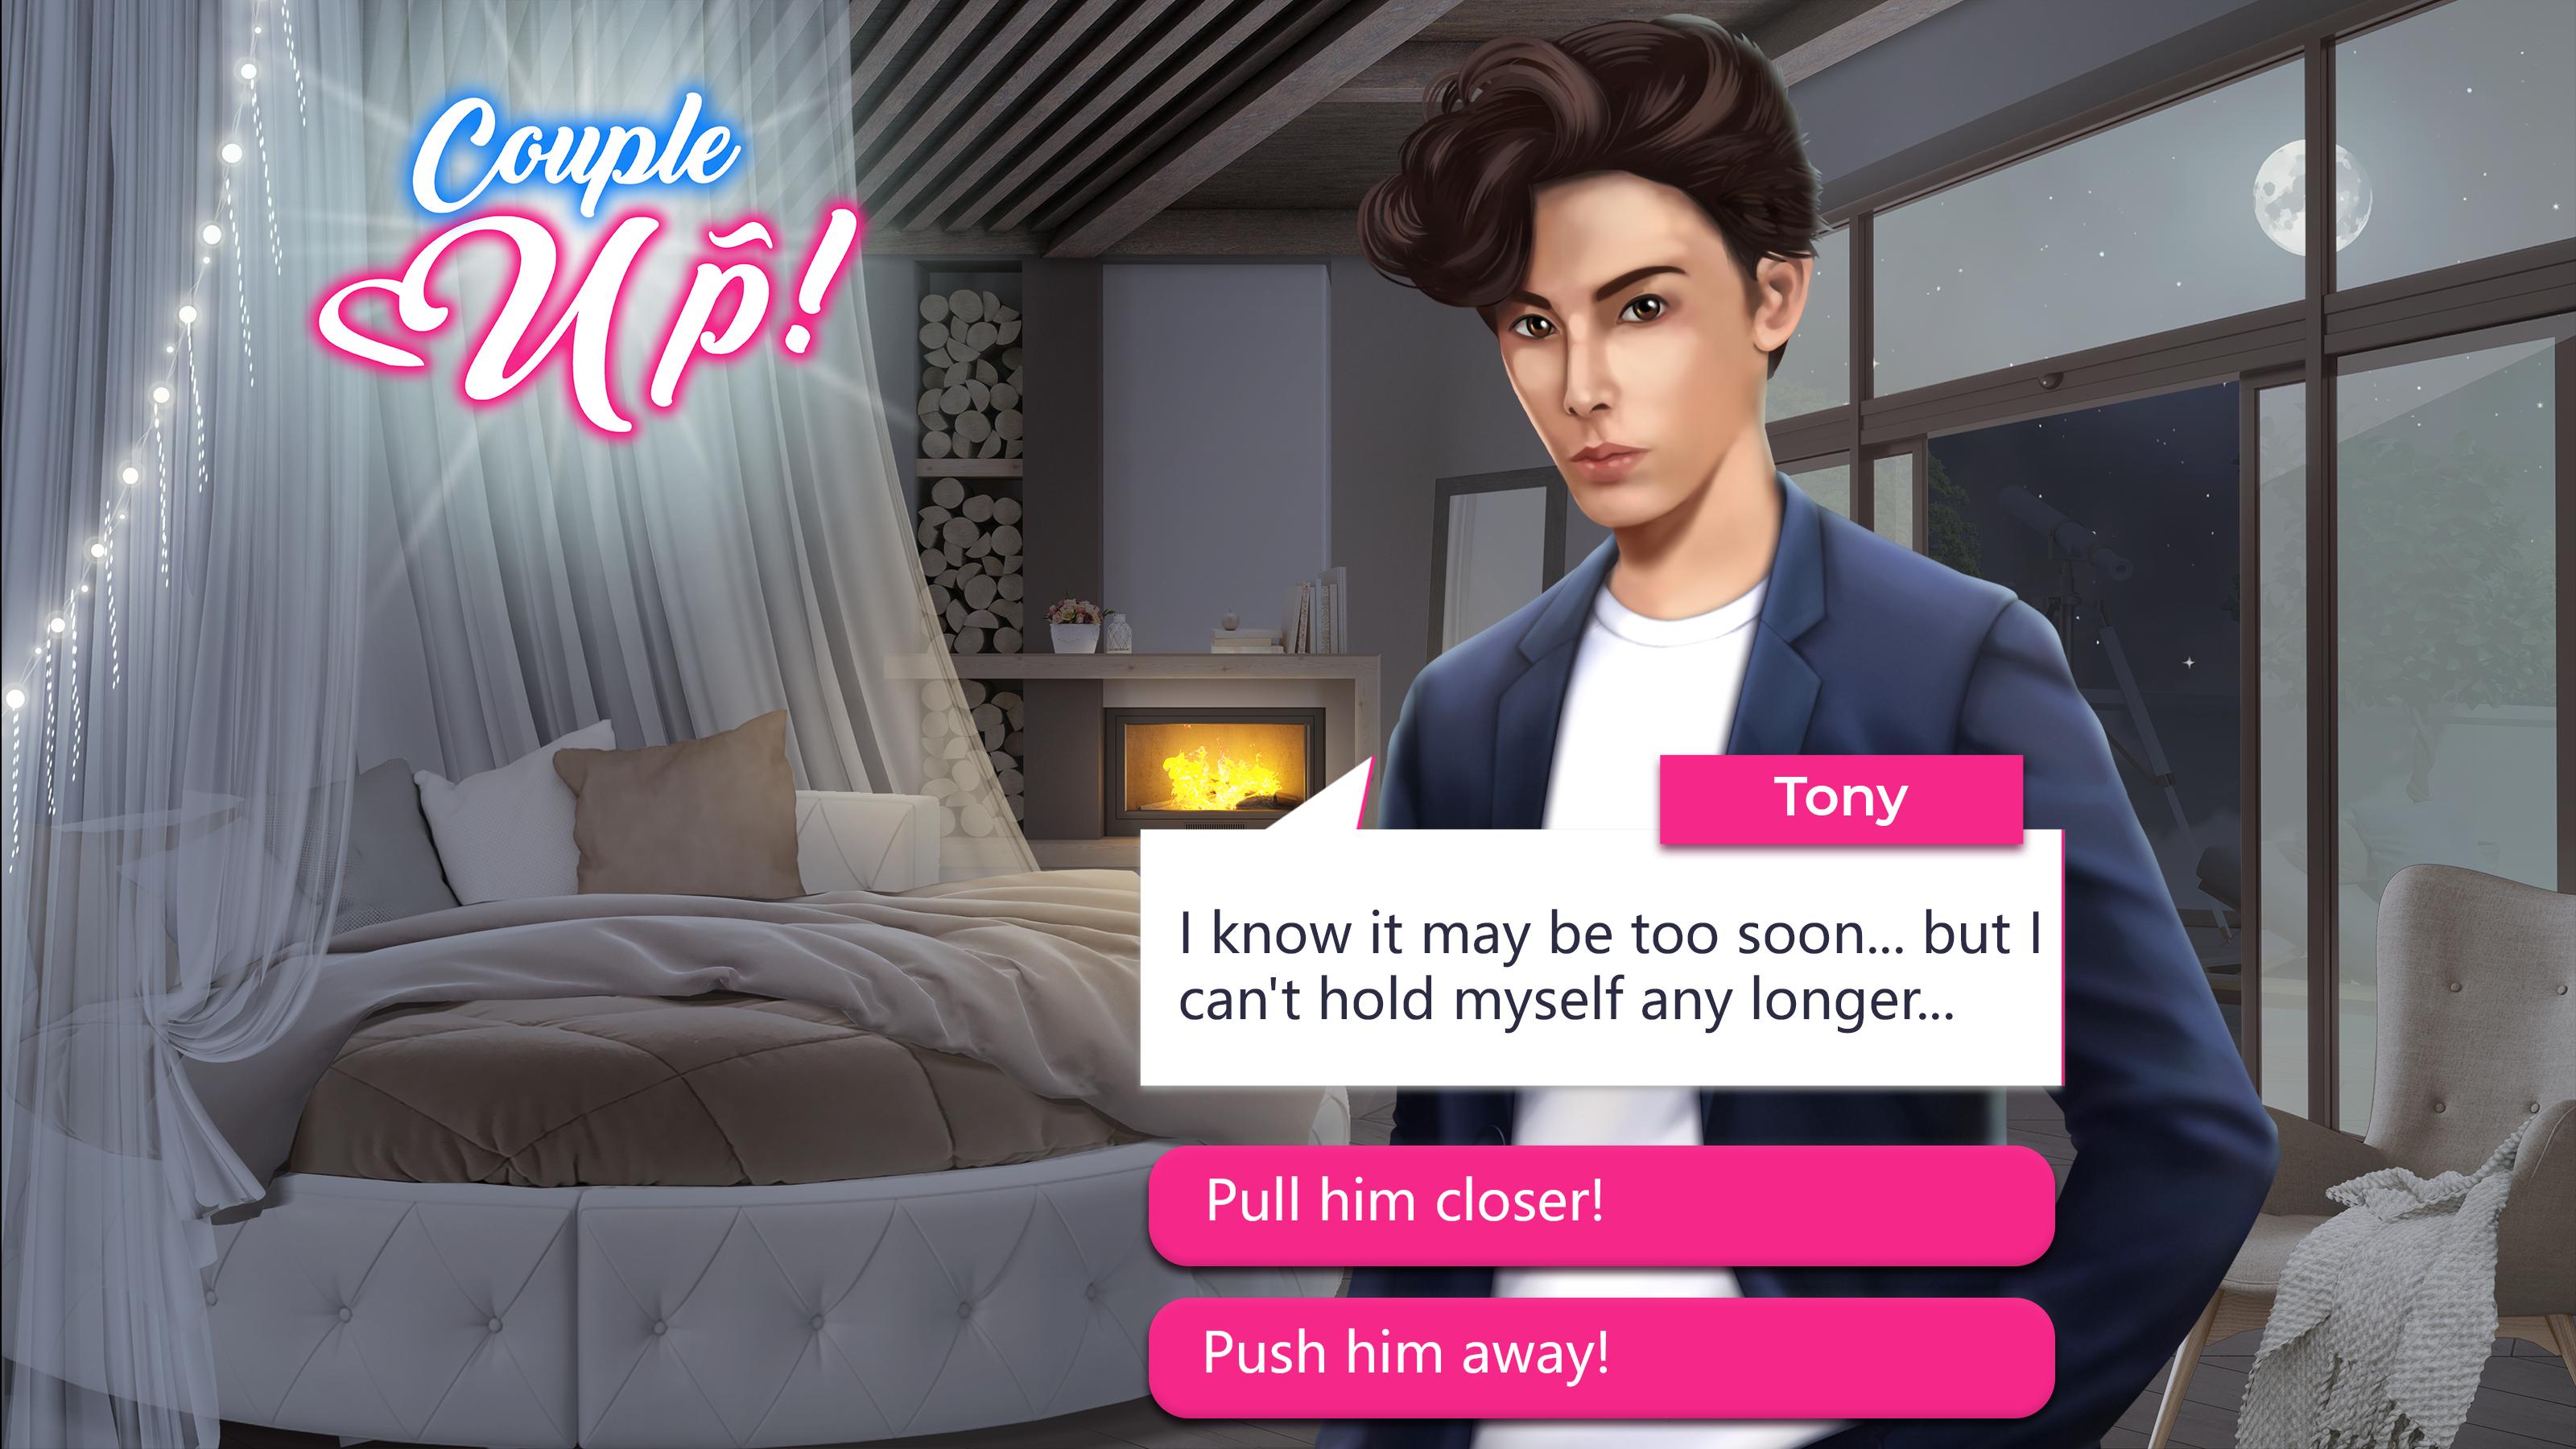 Couple Up! Love Show - Interactive Story 0.7.5 Screenshot 22